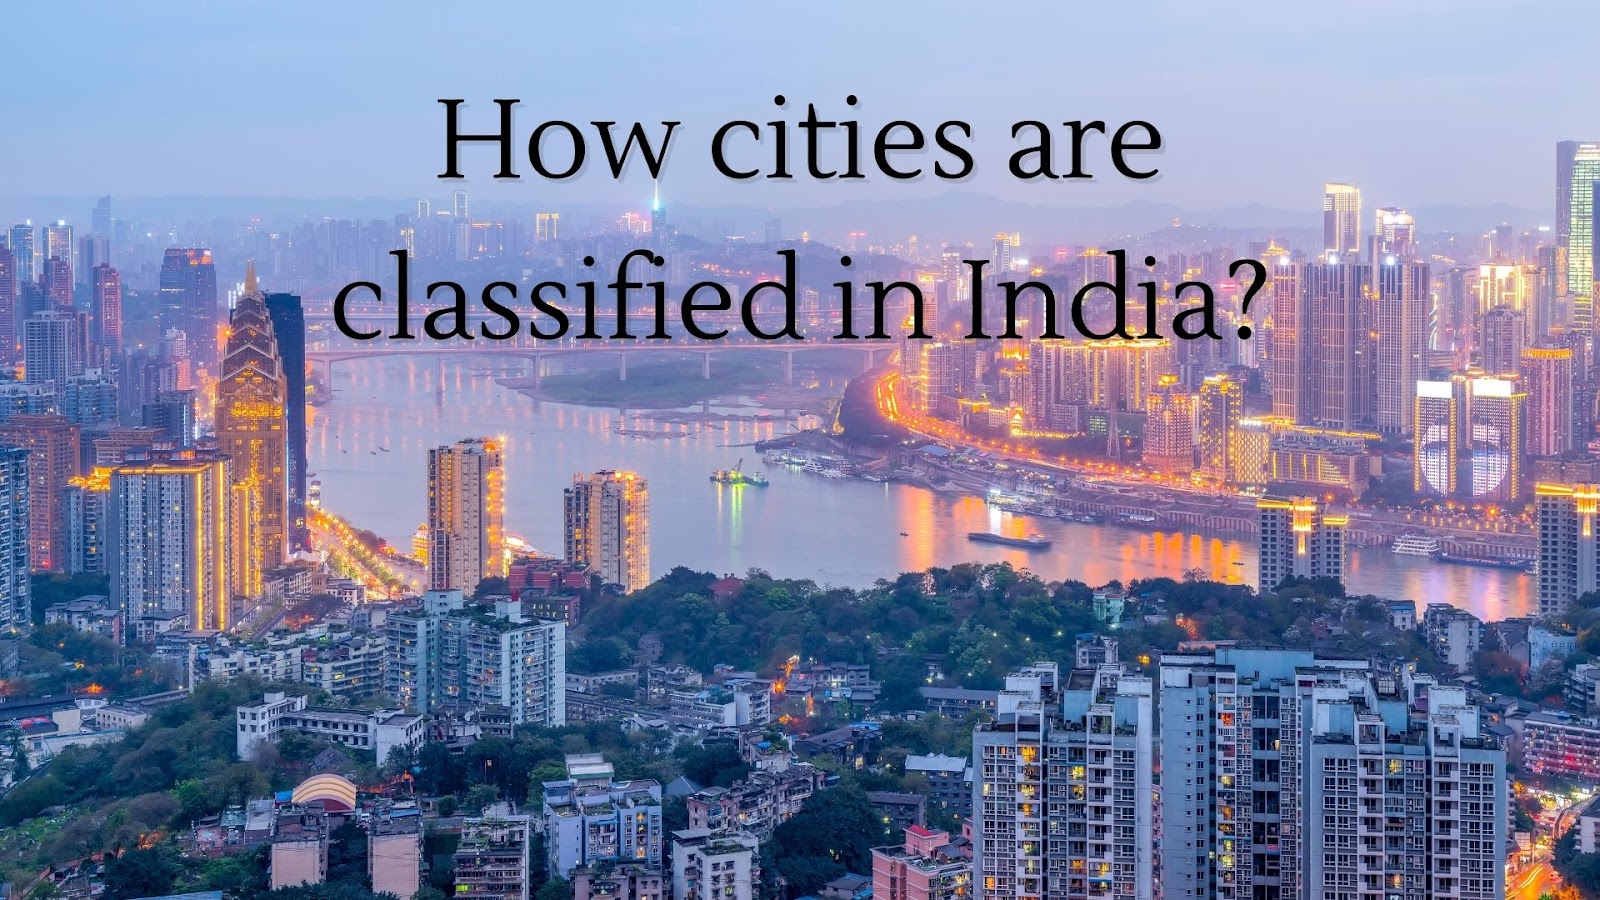 How are cities classified in India?